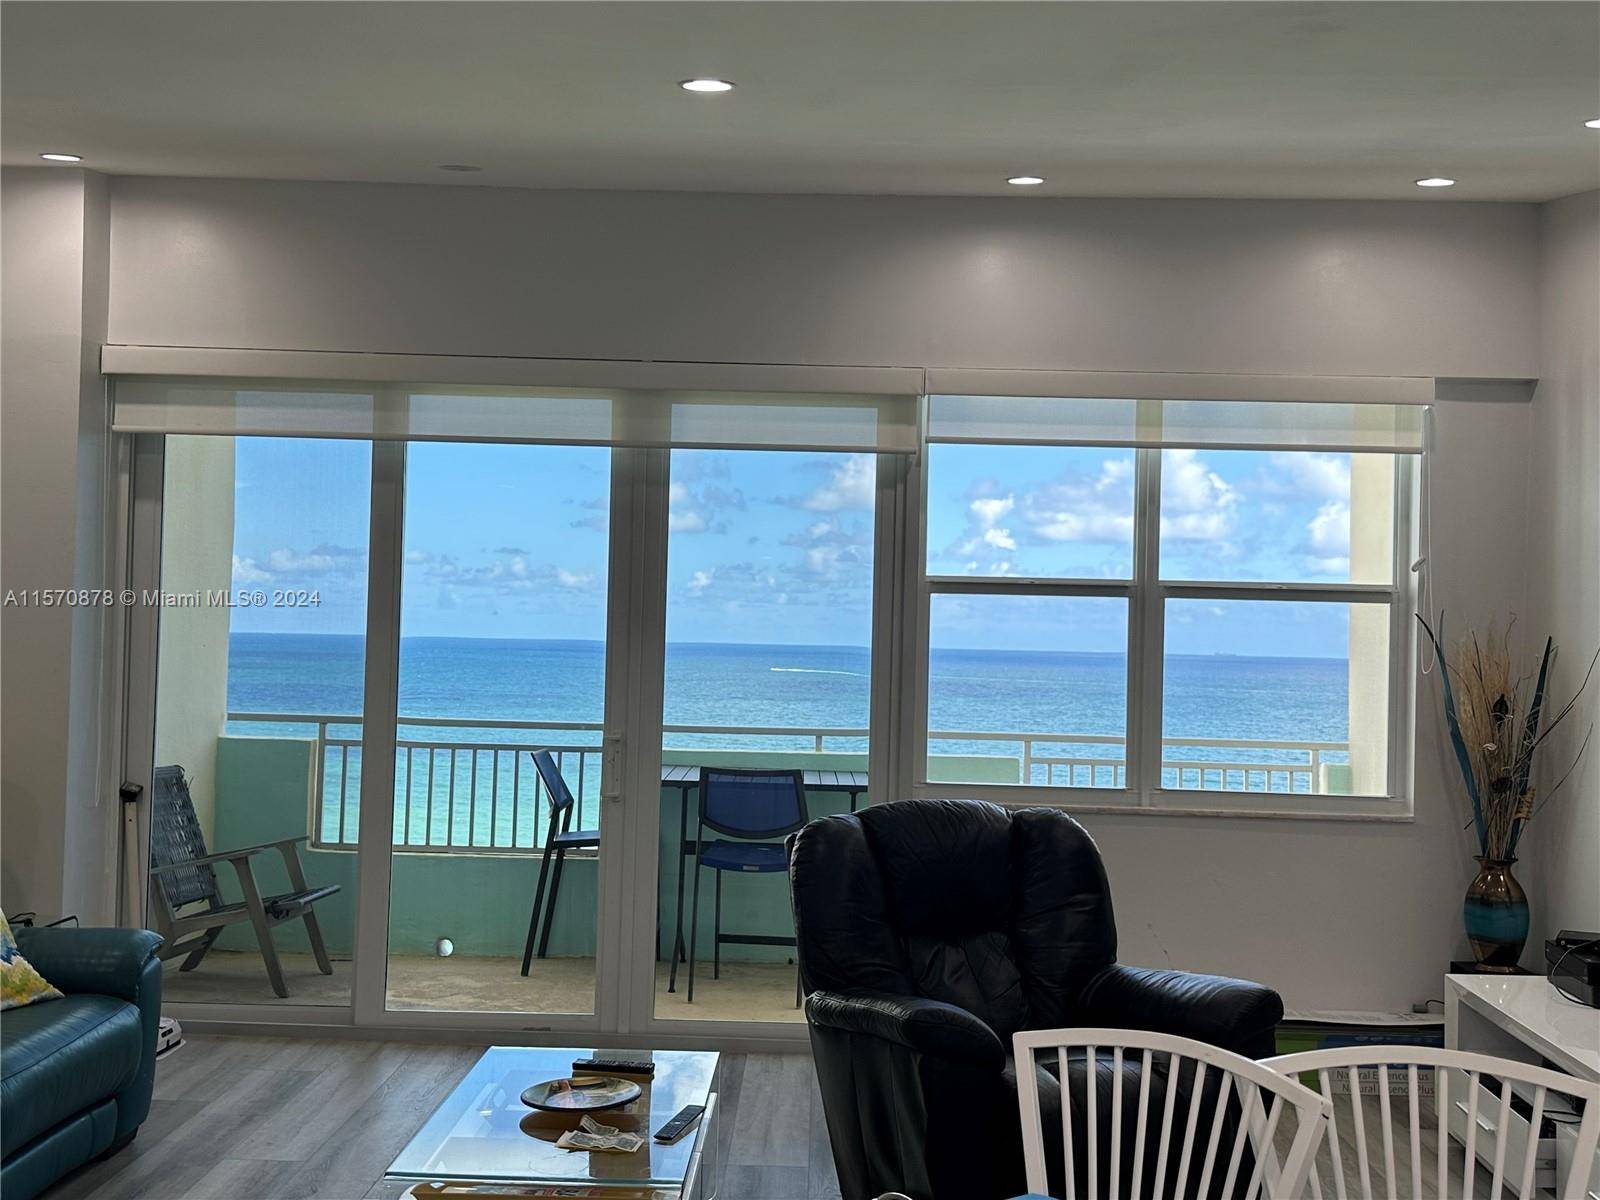 WELCOME TO PARADISE ! MUST SEE THIS AMAZING PENTHOUSE 10 1 2 FOOT CEILINGS, 1 BEDROOM 1 1 2 BATHS WITH UNOBSTRUCTED, PANORAMIC, DIRECT OCEAN VIEWS.